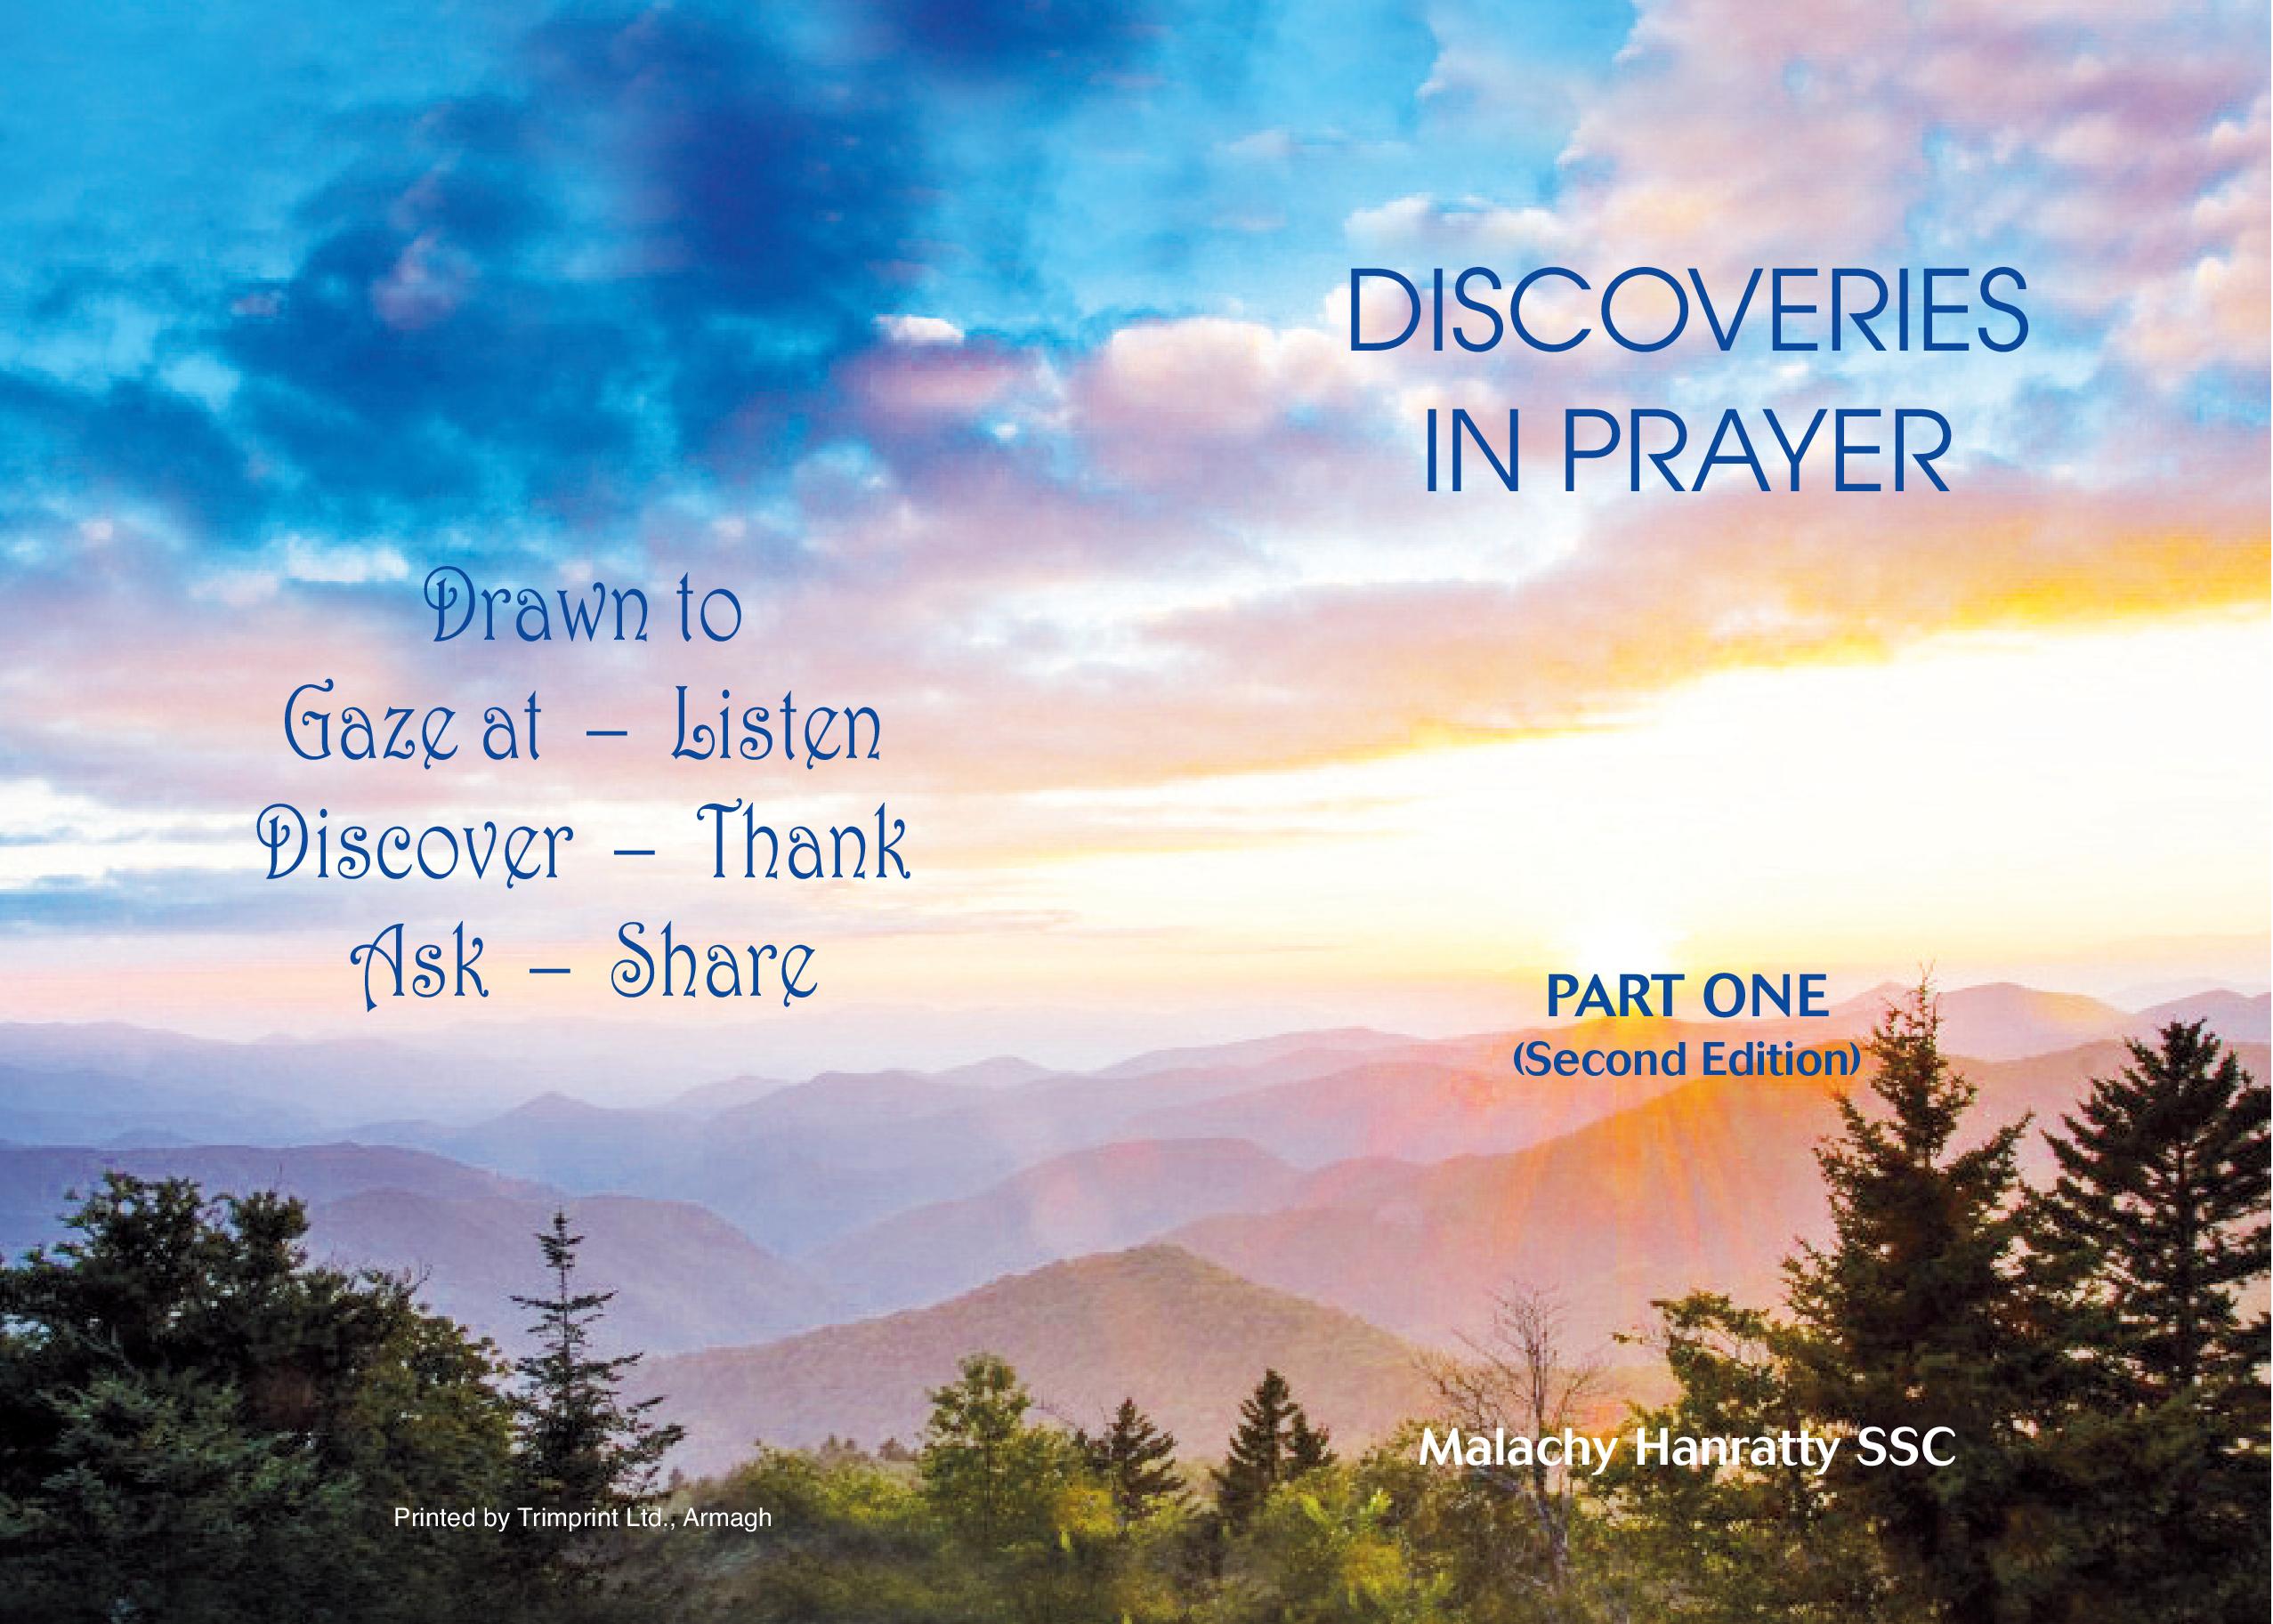 ‘Discoveries in Prayer’ now available for free via this website